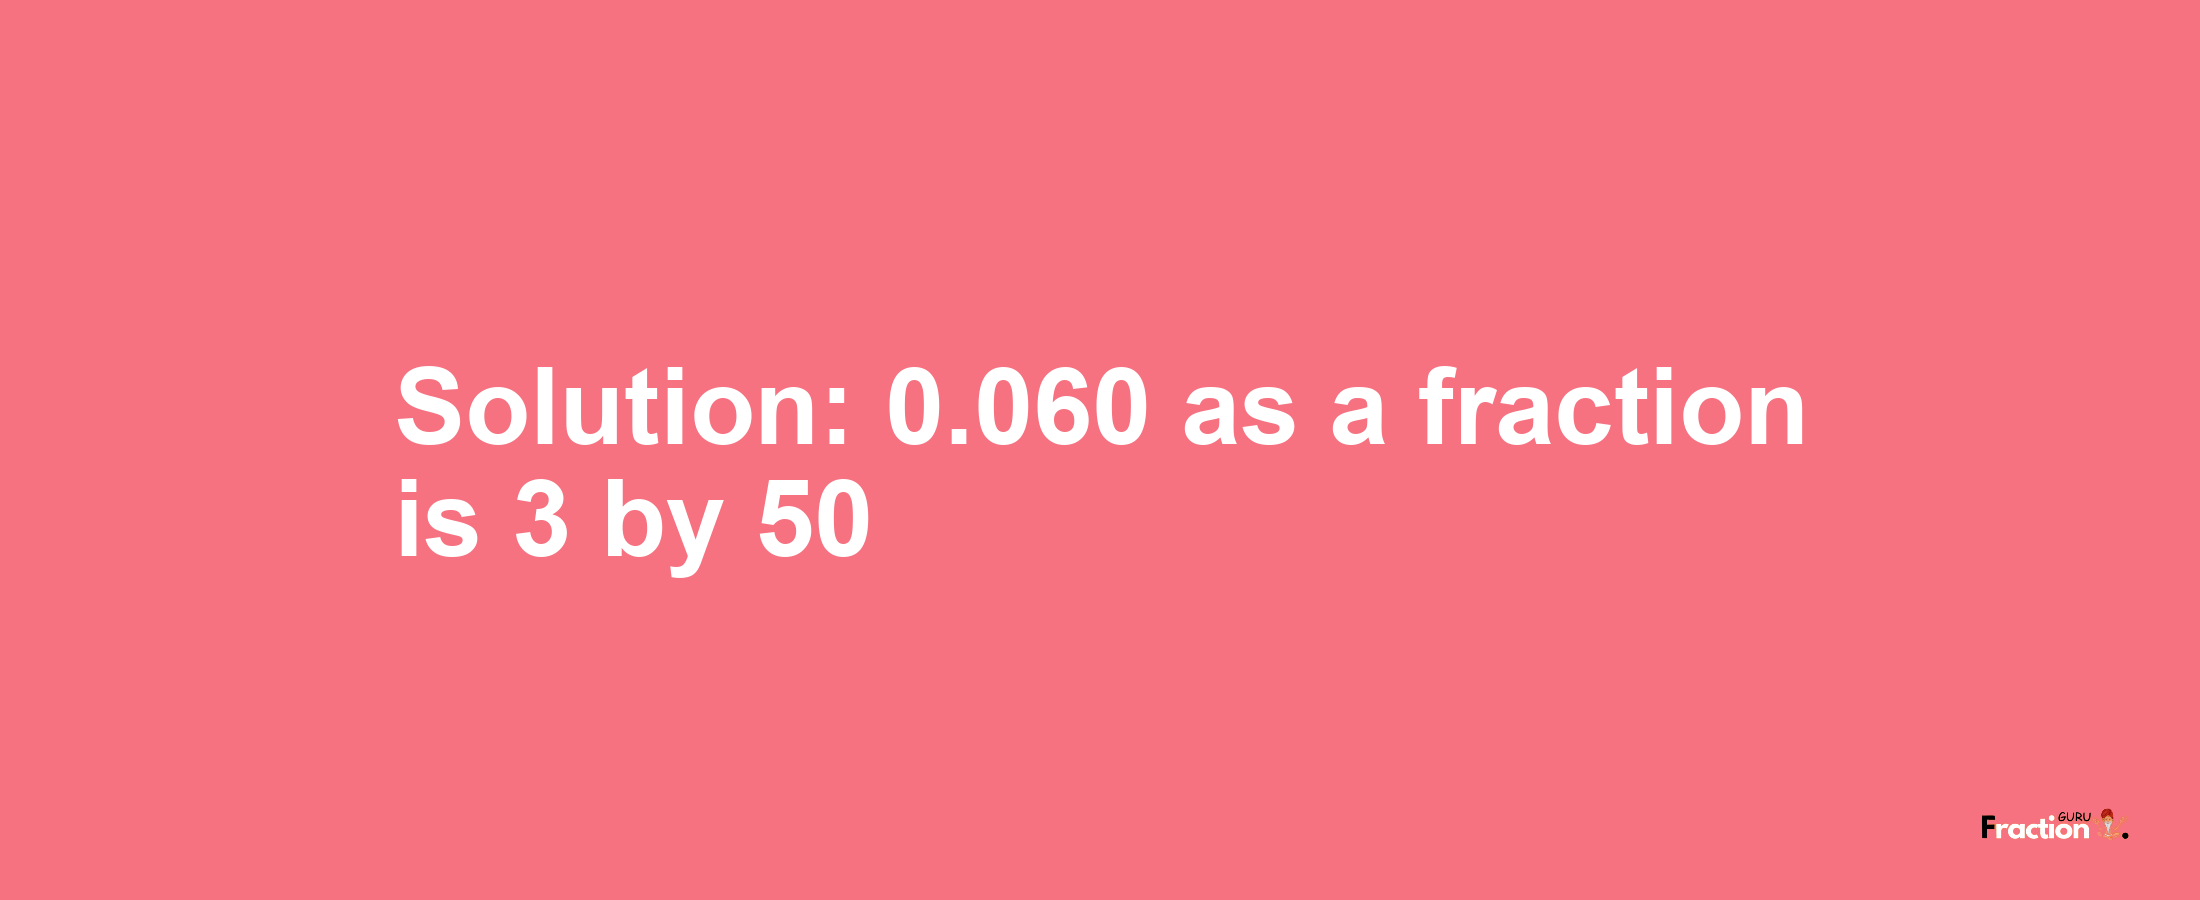 Solution:0.060 as a fraction is 3/50